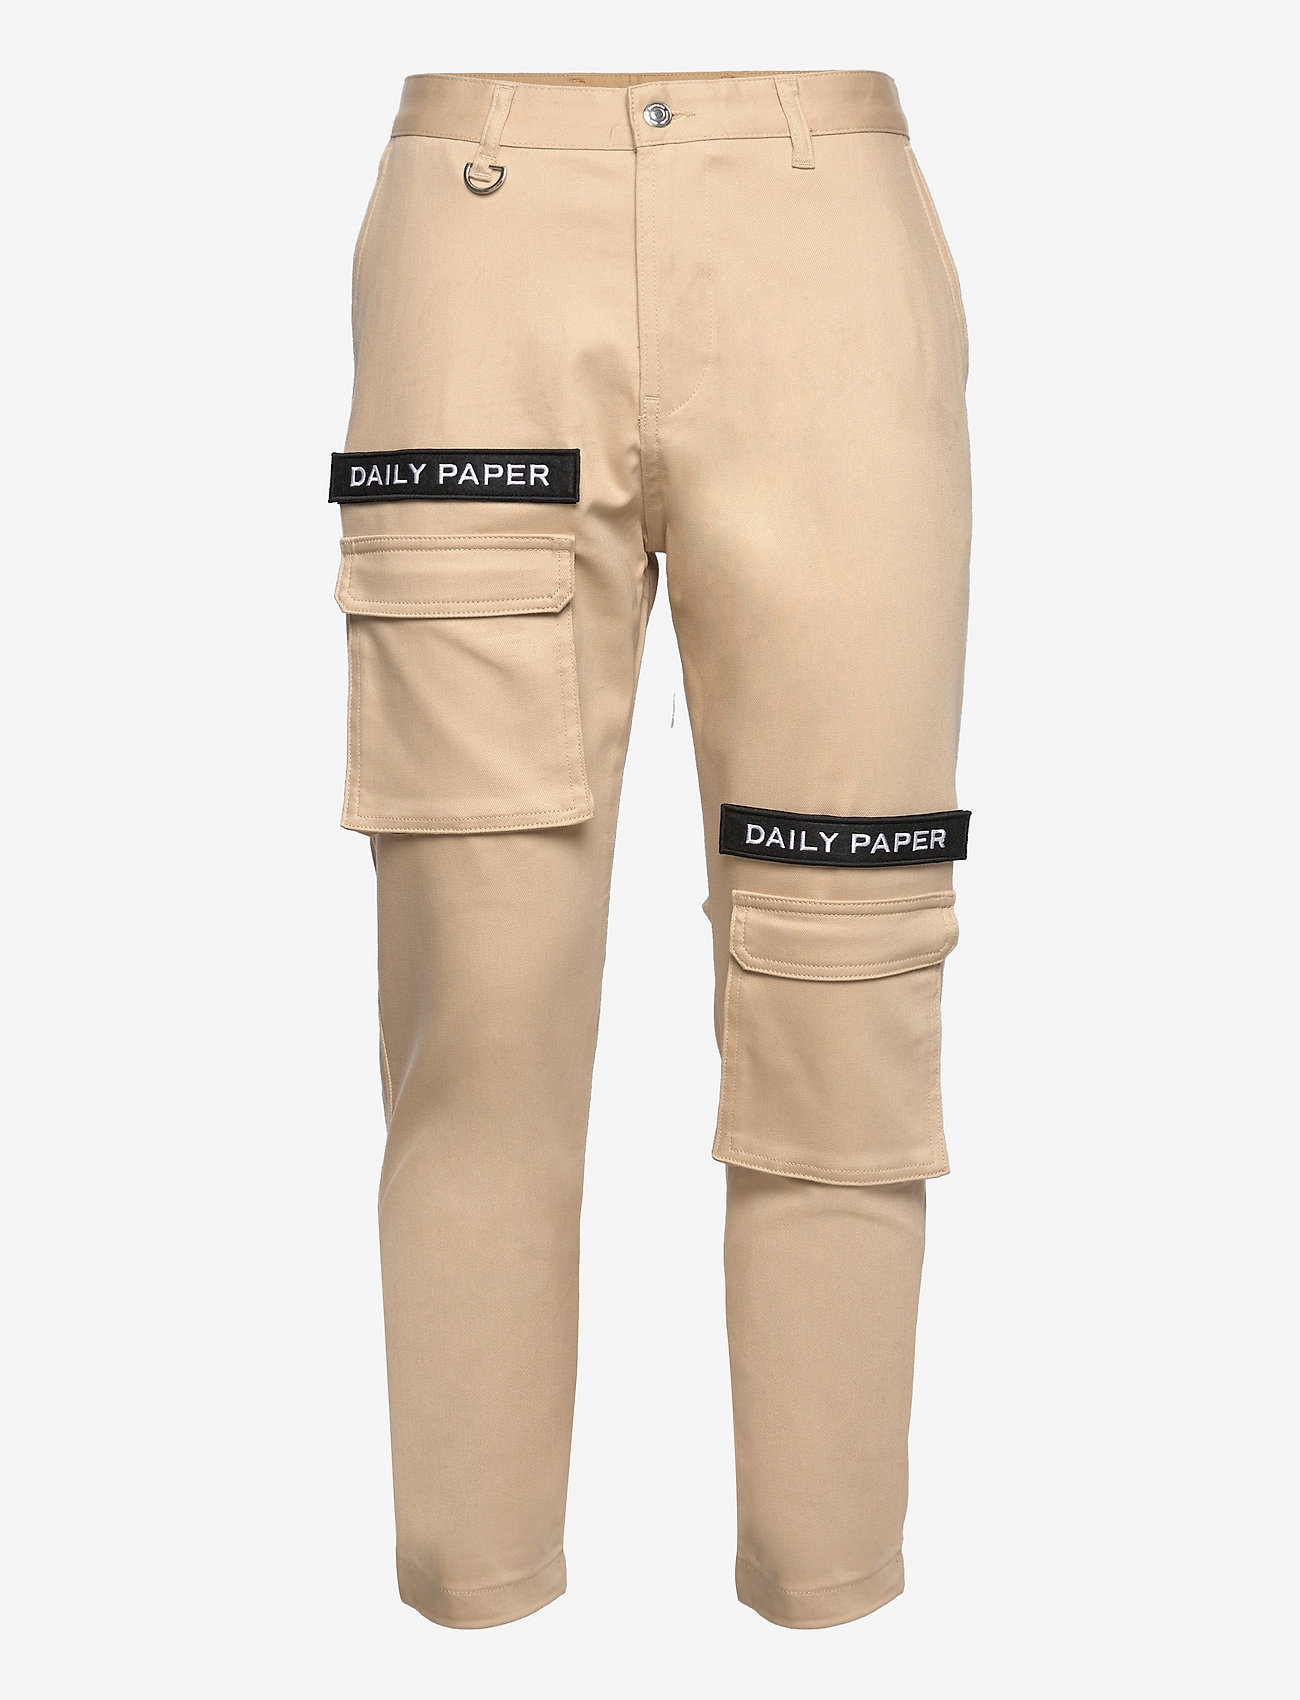 Daily Paper Cargo Pants - Cargo pants | Boozt.com